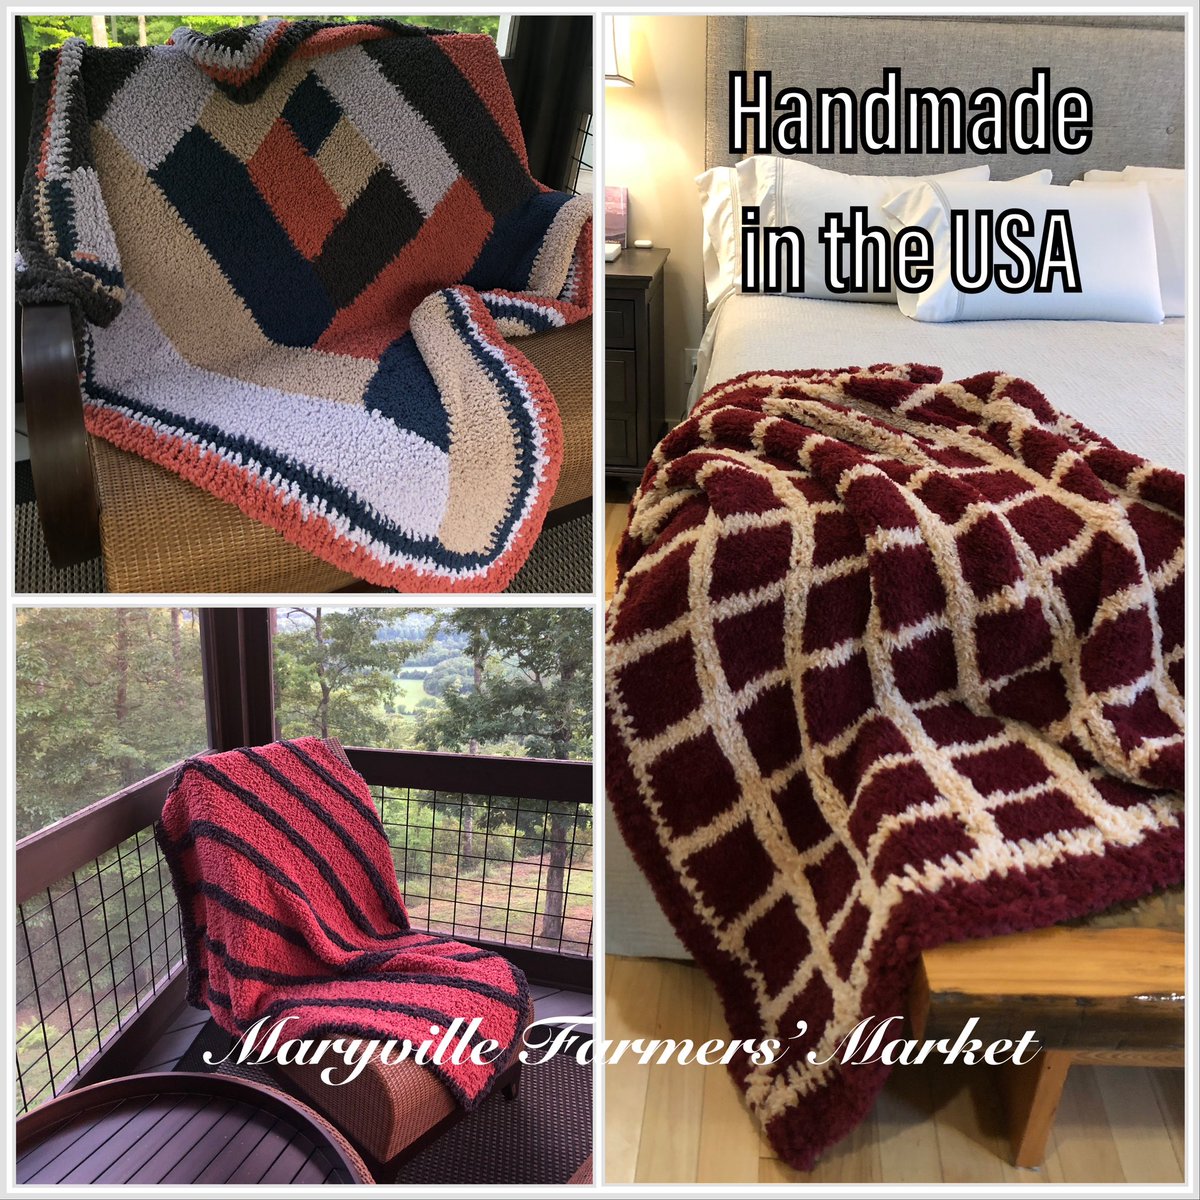 Irina from Handmade in the USA will be at Saturday’s market, 8:30-11:30 AM, with hand knitted blankets made with a variety of sheepy, alpaca and faux fur yarns, and Cotton linen! They are functional, beautiful and make great gifts!
#maryvillefarmersmarket
#handmadeintheusa